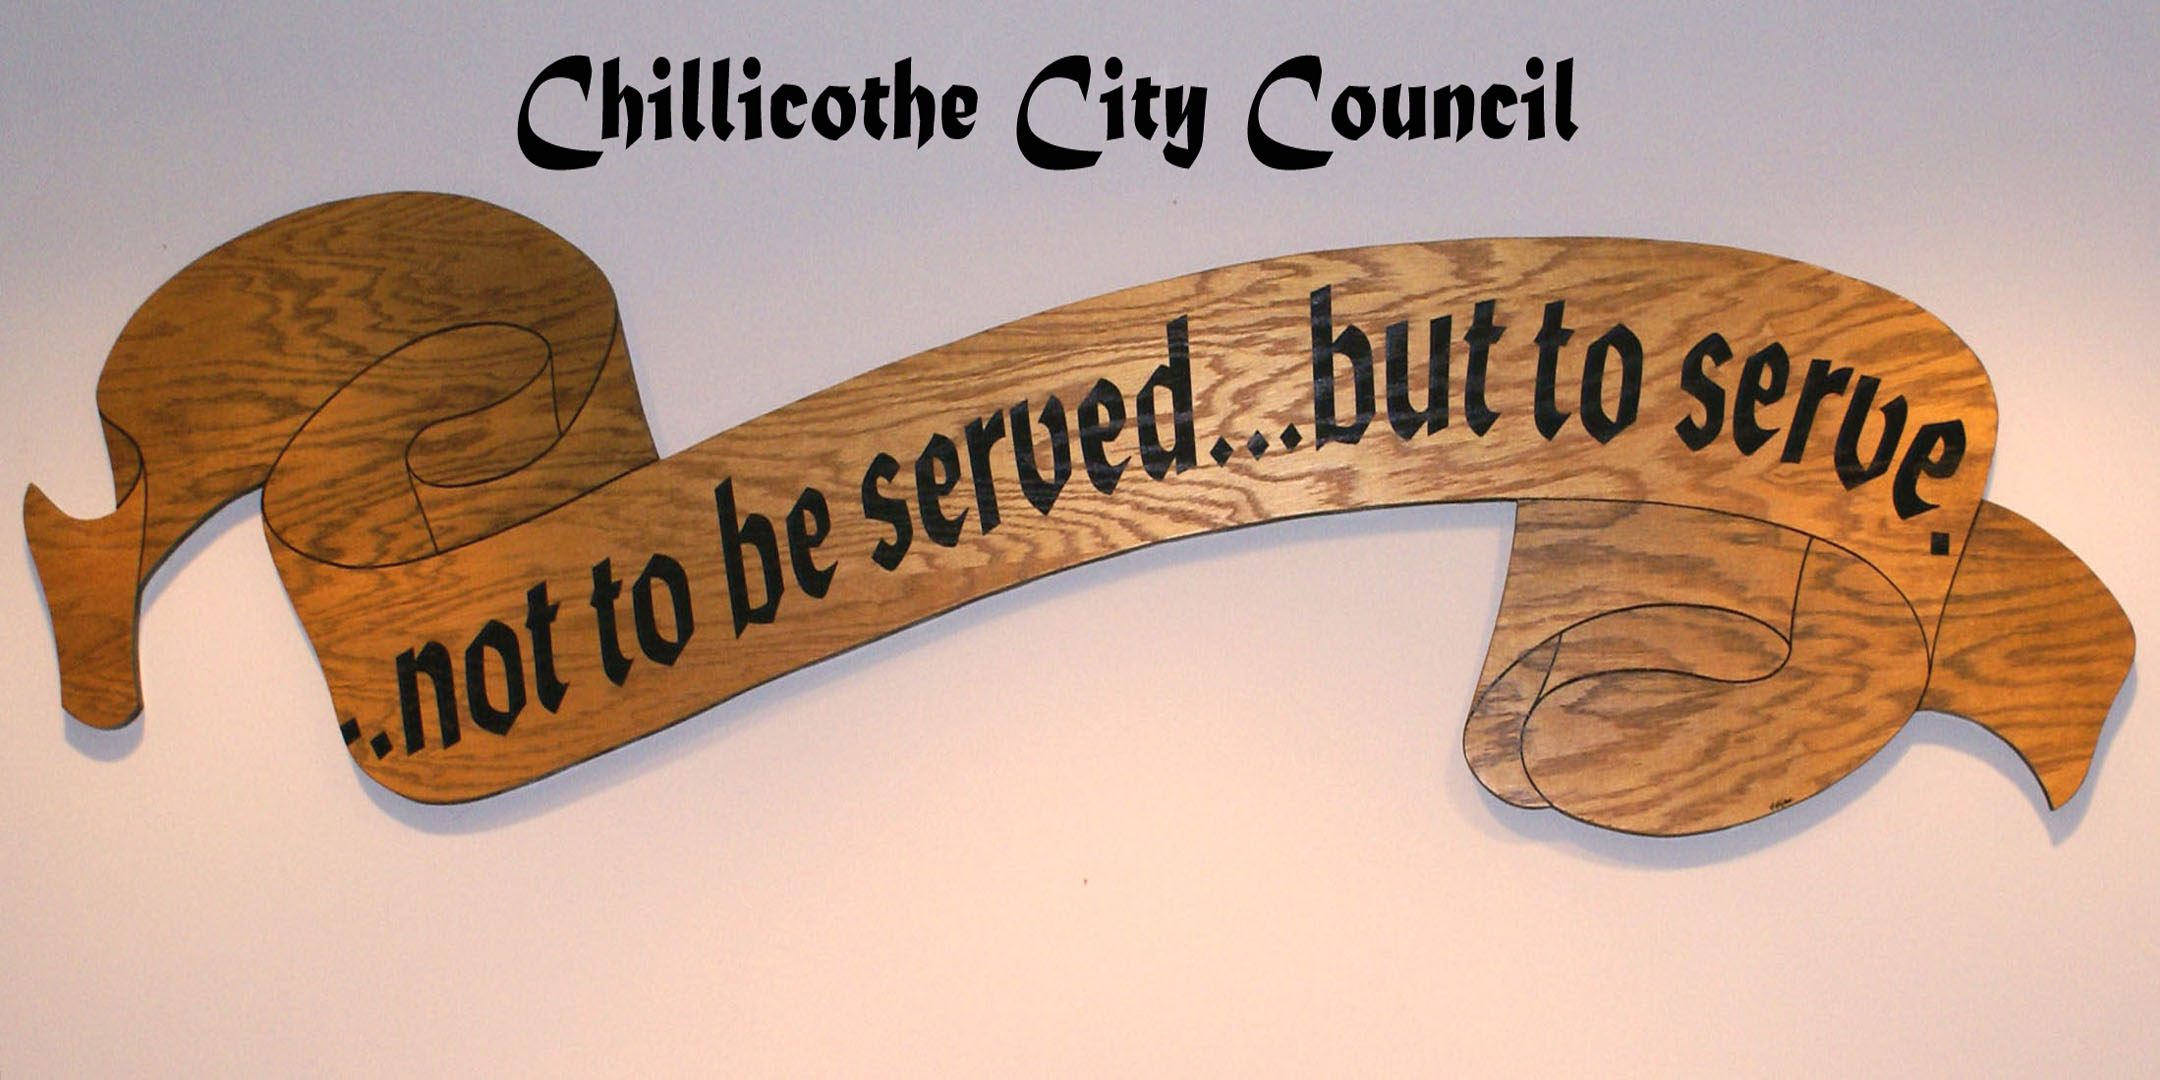 City of Chillicothe Personnel & Real Estate Matters